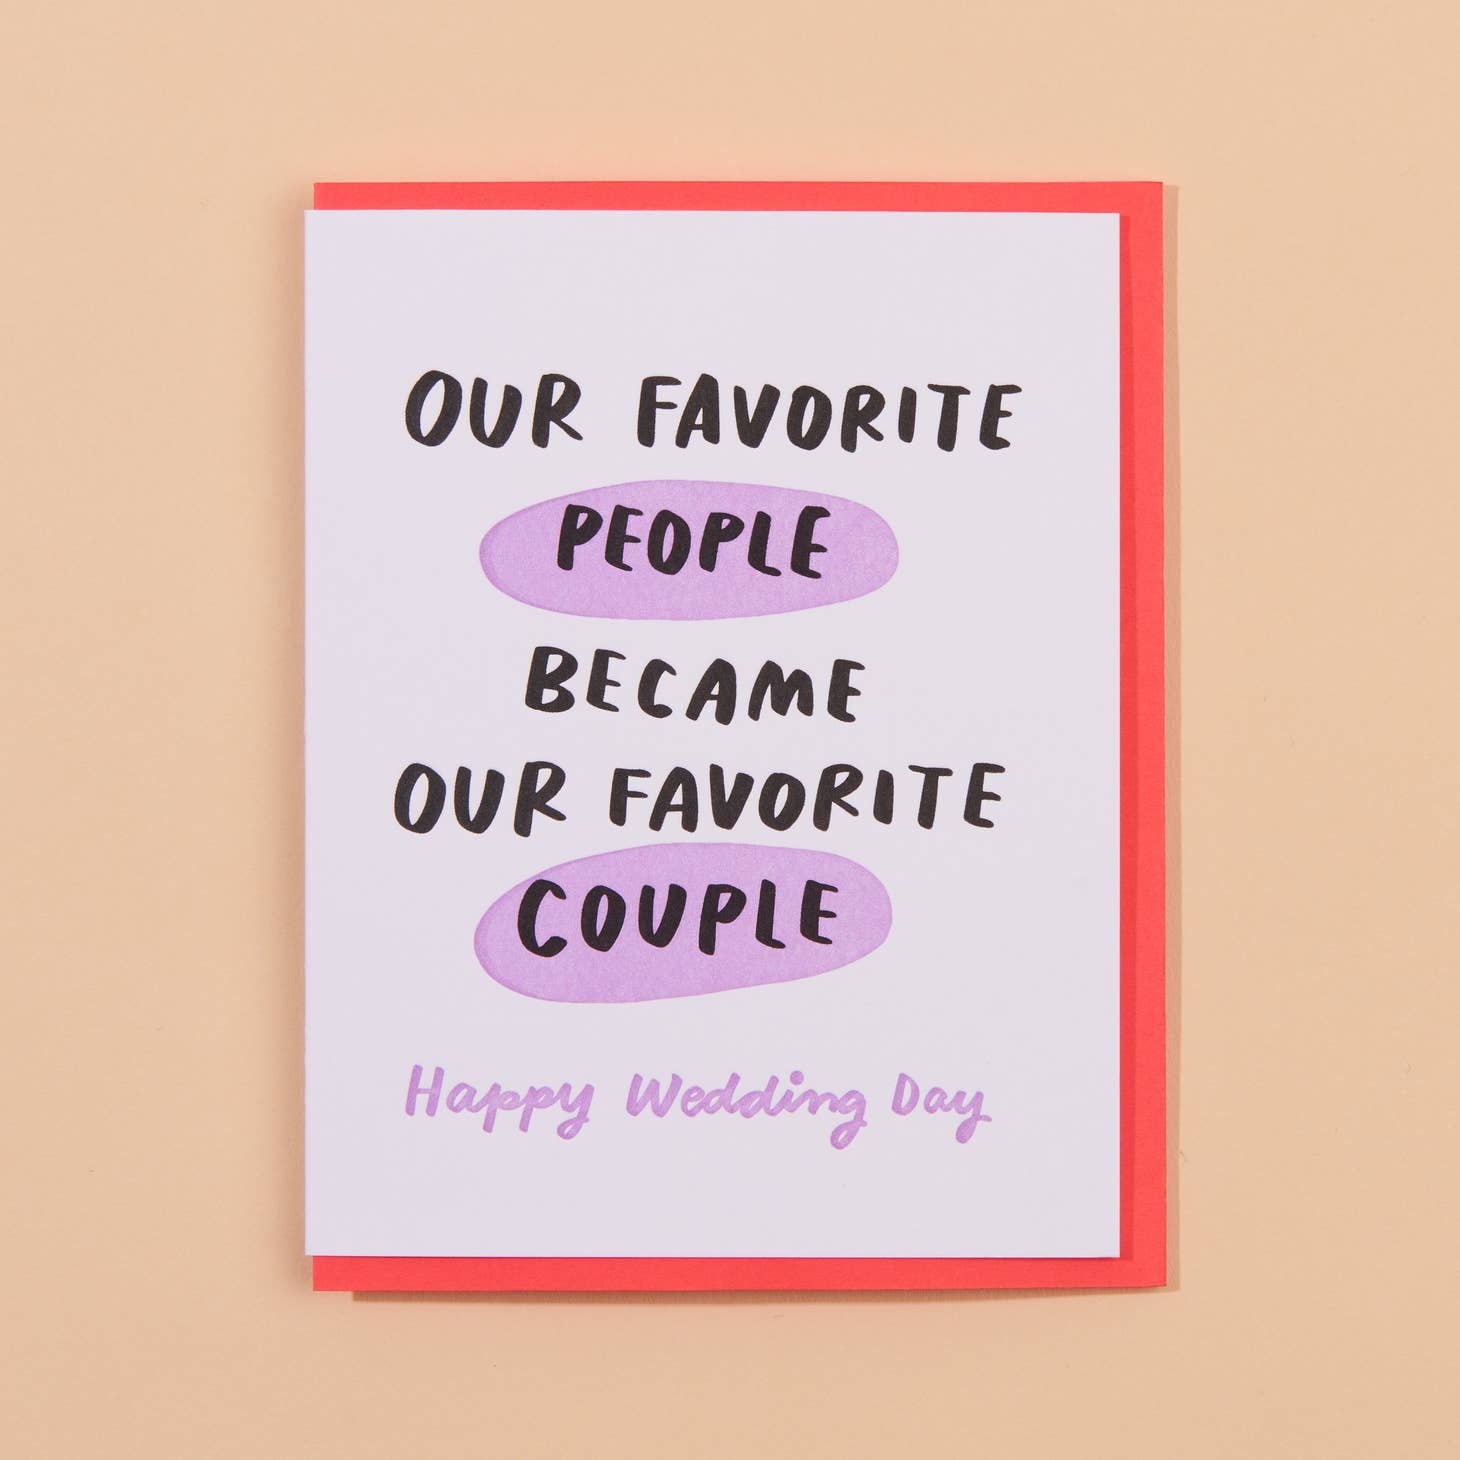 White card with black text saying “Our favorite people became our favorite couple” Pink text saying “Happy Wedding Day”. Words people and couple in pink bubbles.   Red envelope included. 